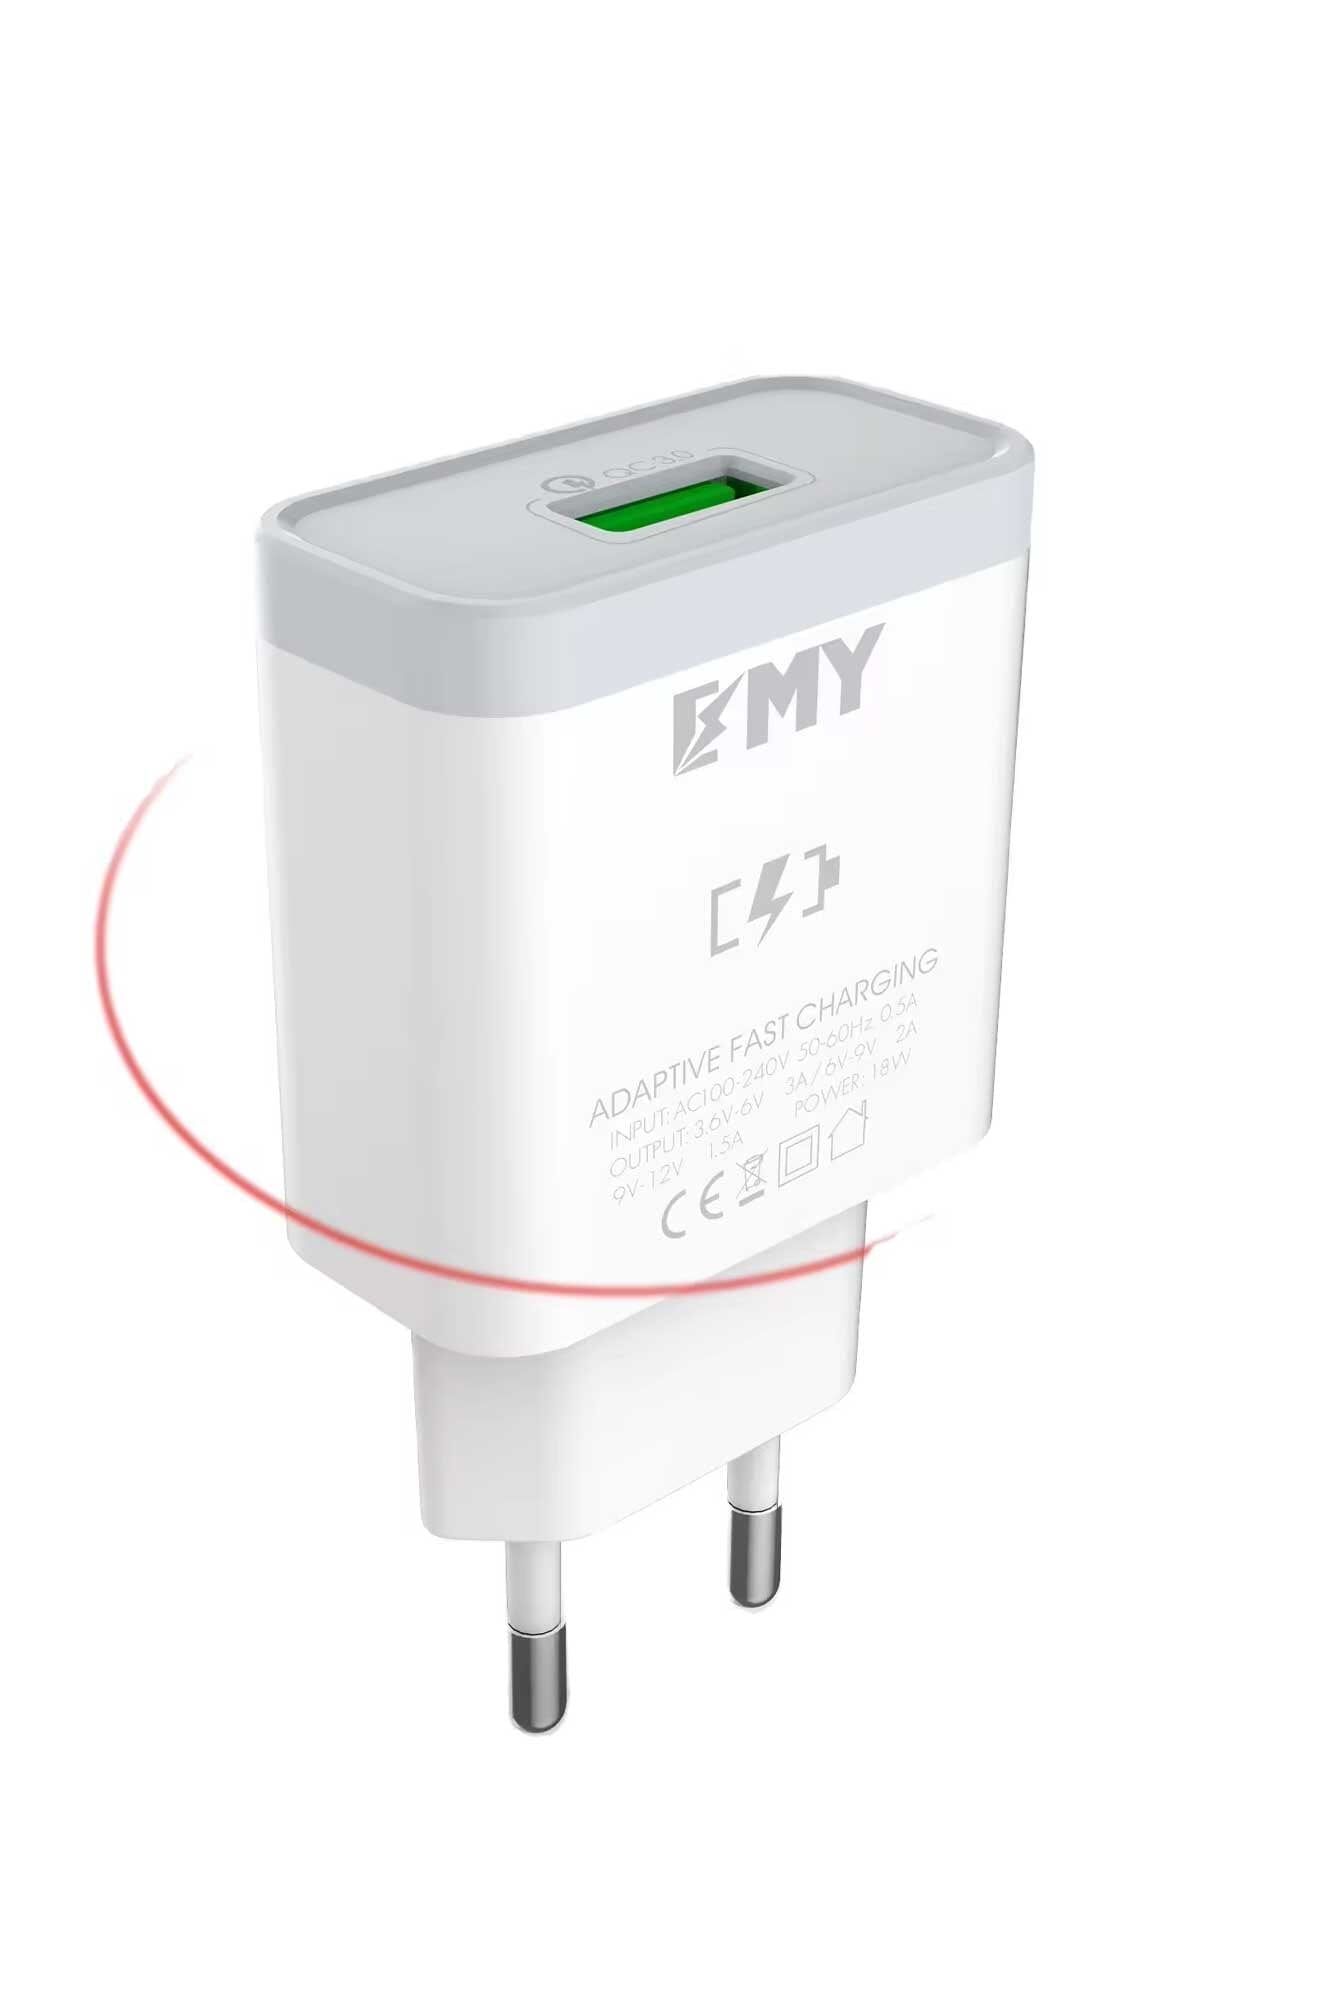 EMY Fast Charging Adapter - 2AMP Mobile Accessories CPUS 